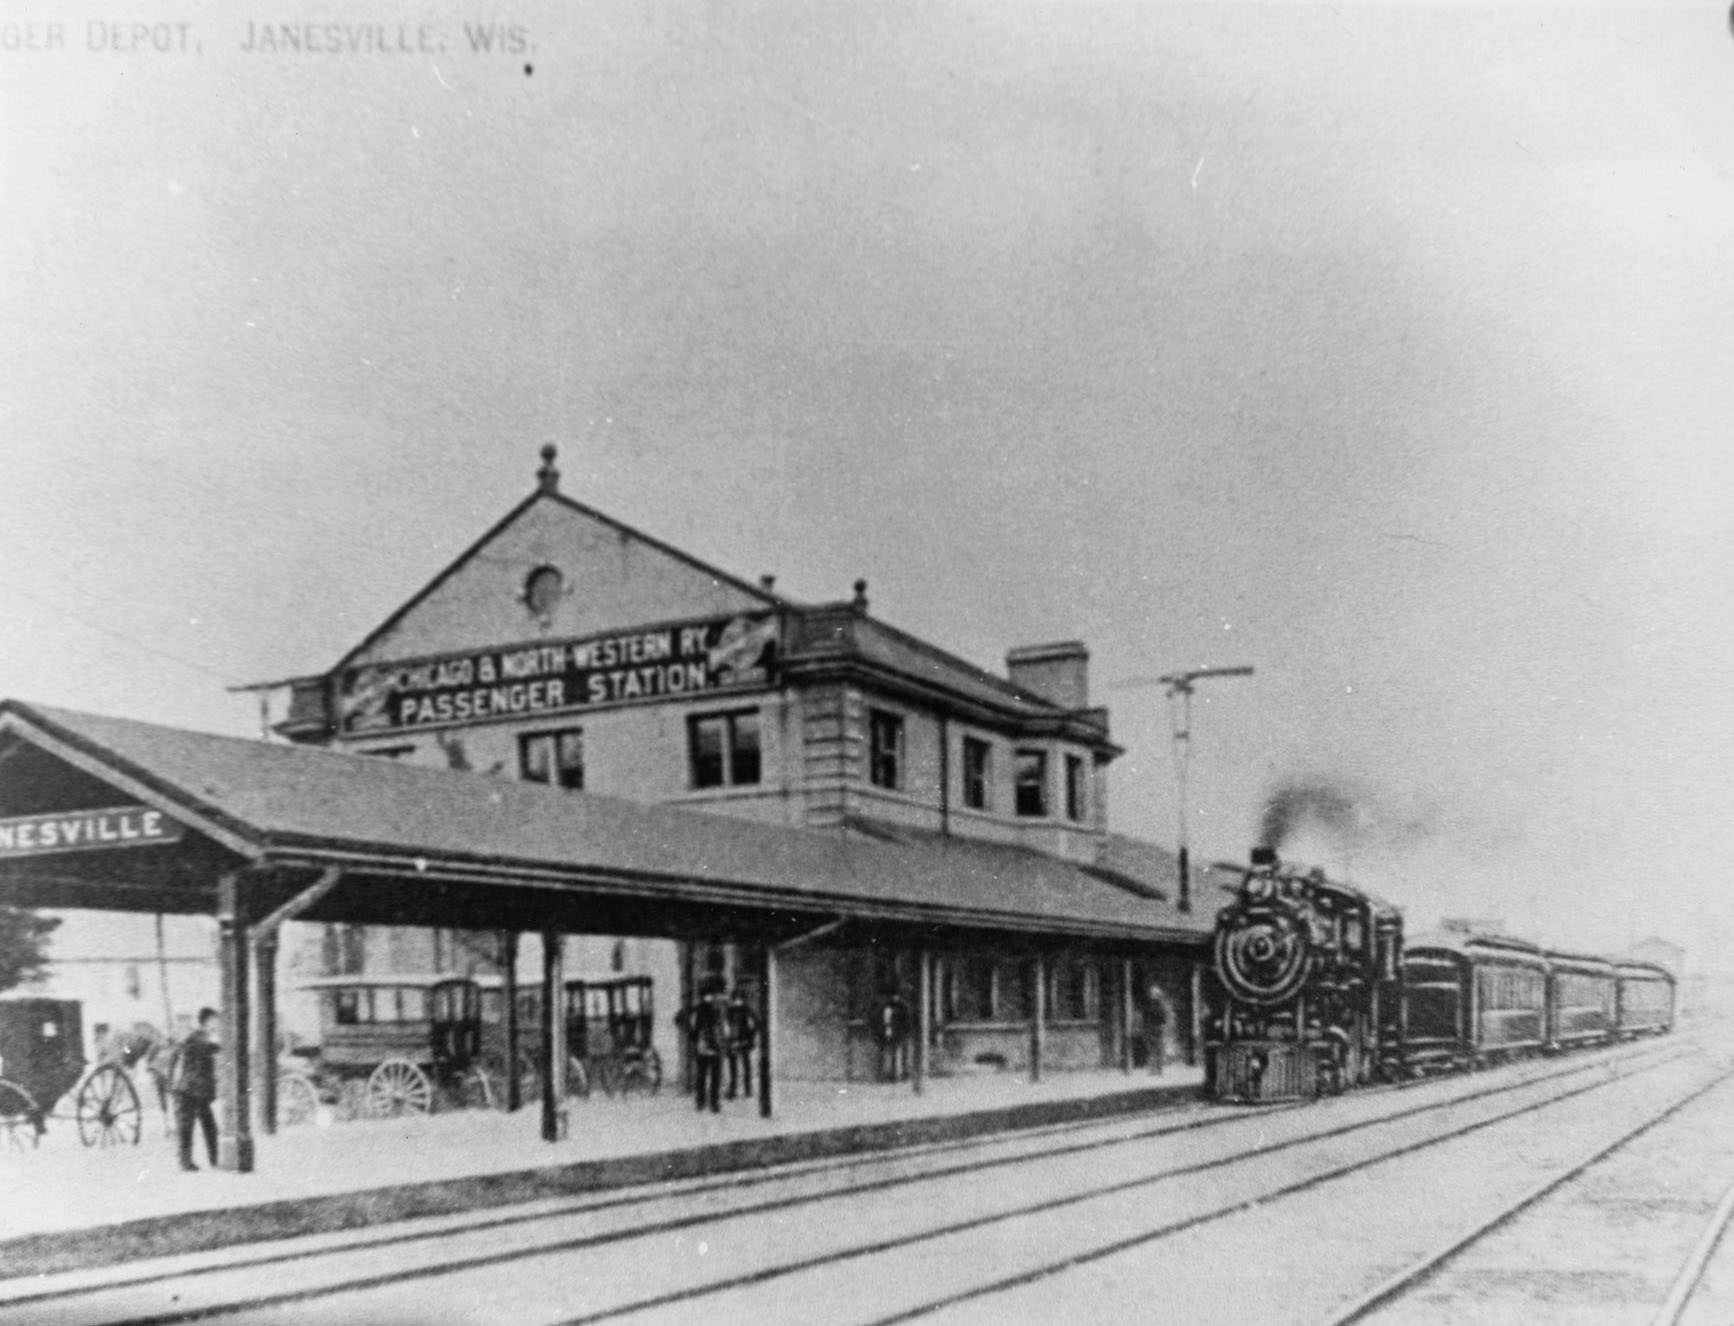 The Chicago and North Western Railroad depot in Janesville with a steam locomotive on the track, 1890